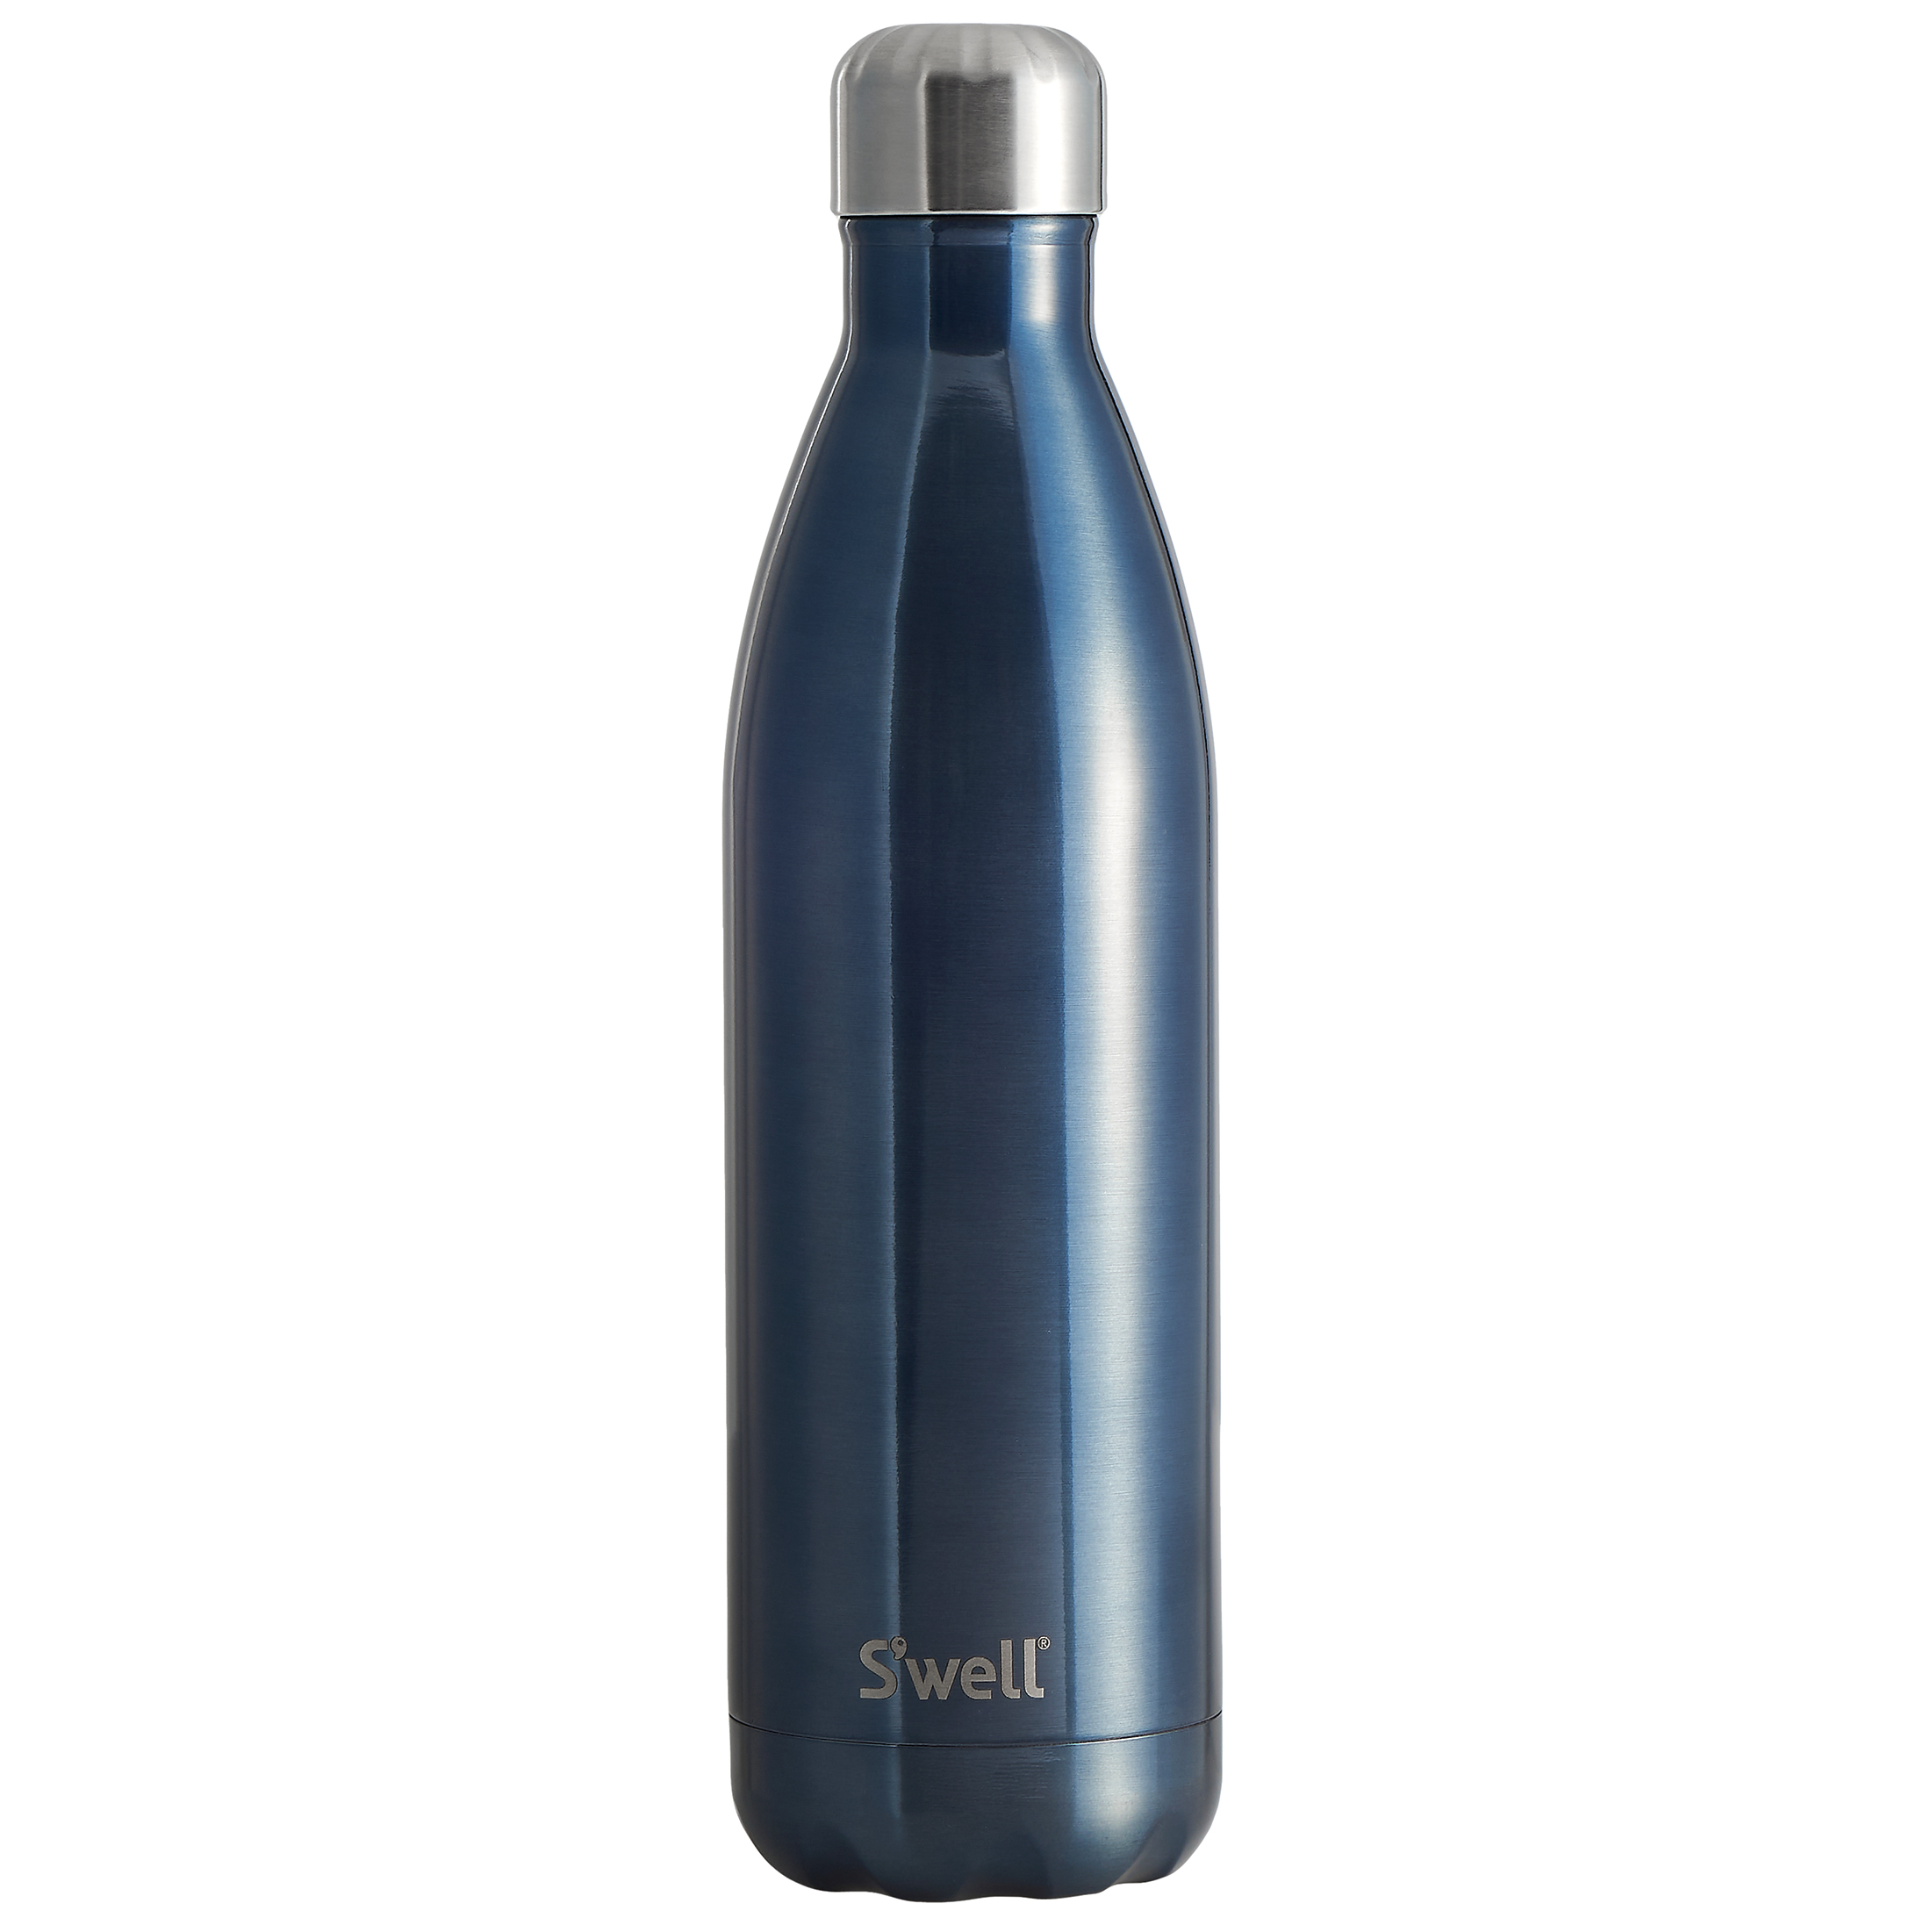 Swell Water Bottle Reviews: Is The Insulated Stainless Steel Bottle Worth It